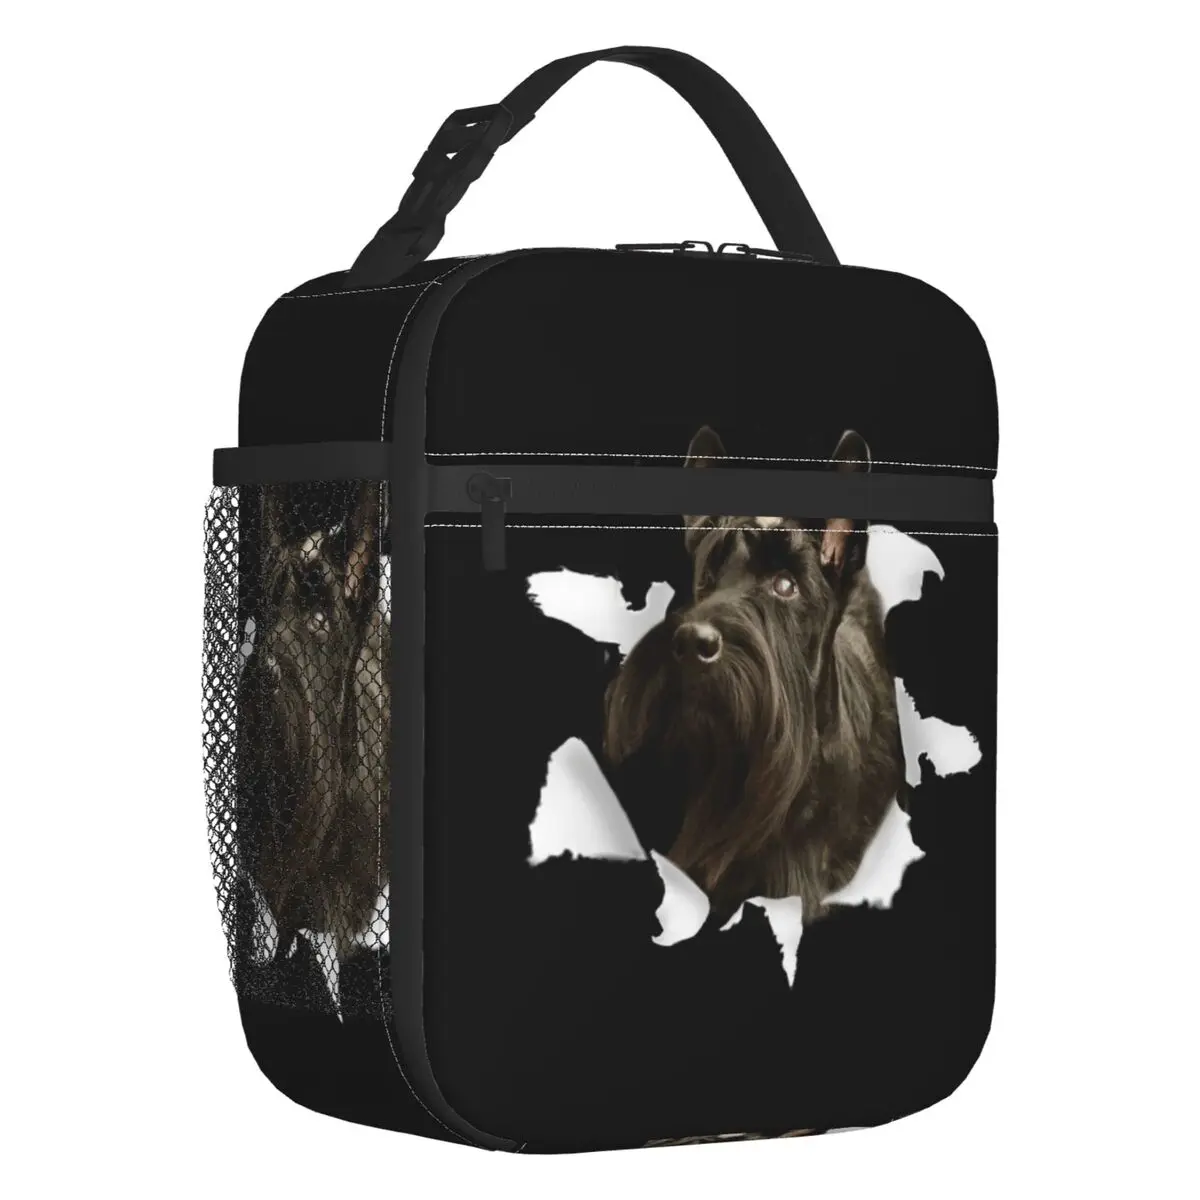 Scottish Terrier Dog Insulated Lunch Bag for Women Resuable Scottie Cooler Thermal Lunch Box Kids School Children